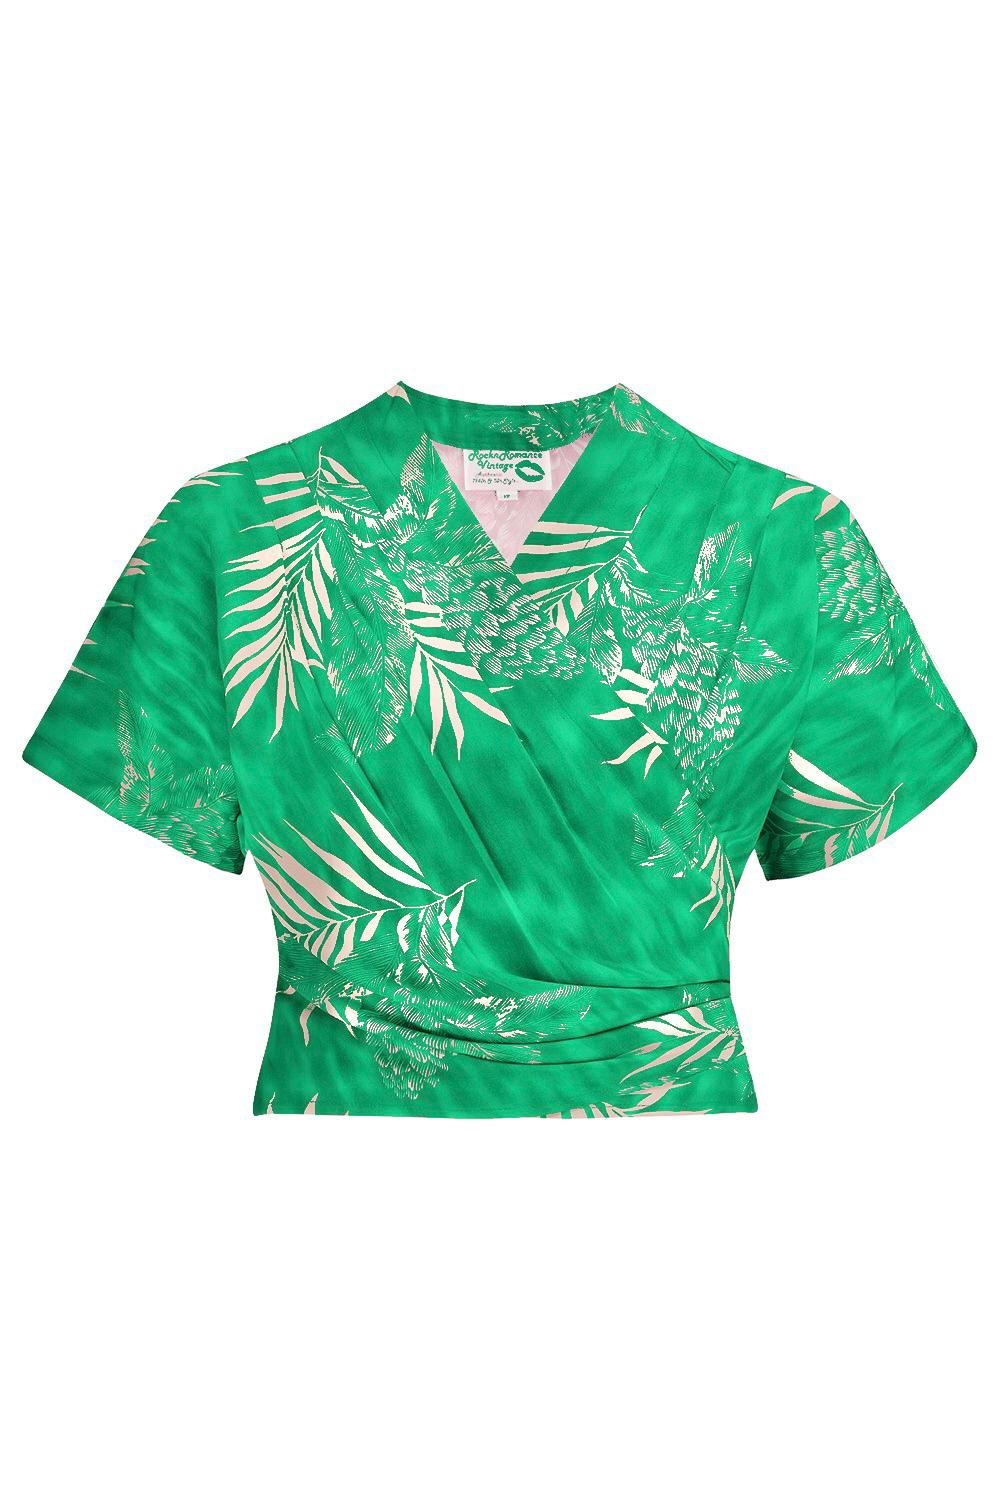 The "Darla" Short Sleeve Wrap Blouse in Emerald Palm Print, True Vintage Style